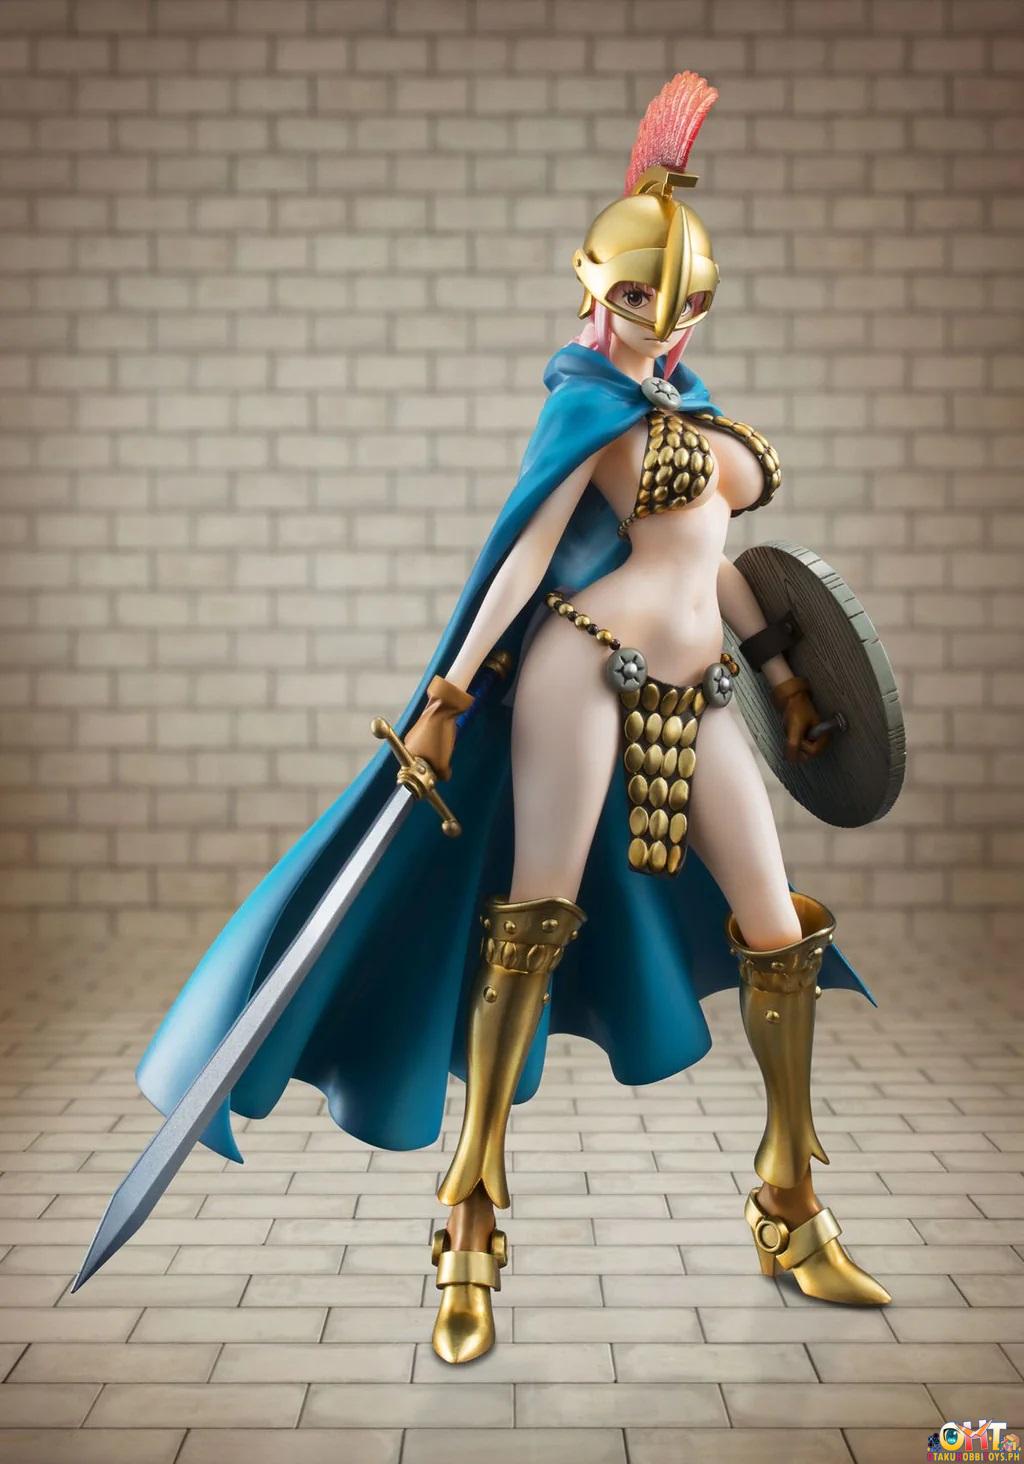 [REISSUE] Portrait.Of.Pirates: ONE PIECE "Sailing Again" Gladiator Rebecca (Limited Reproduction)